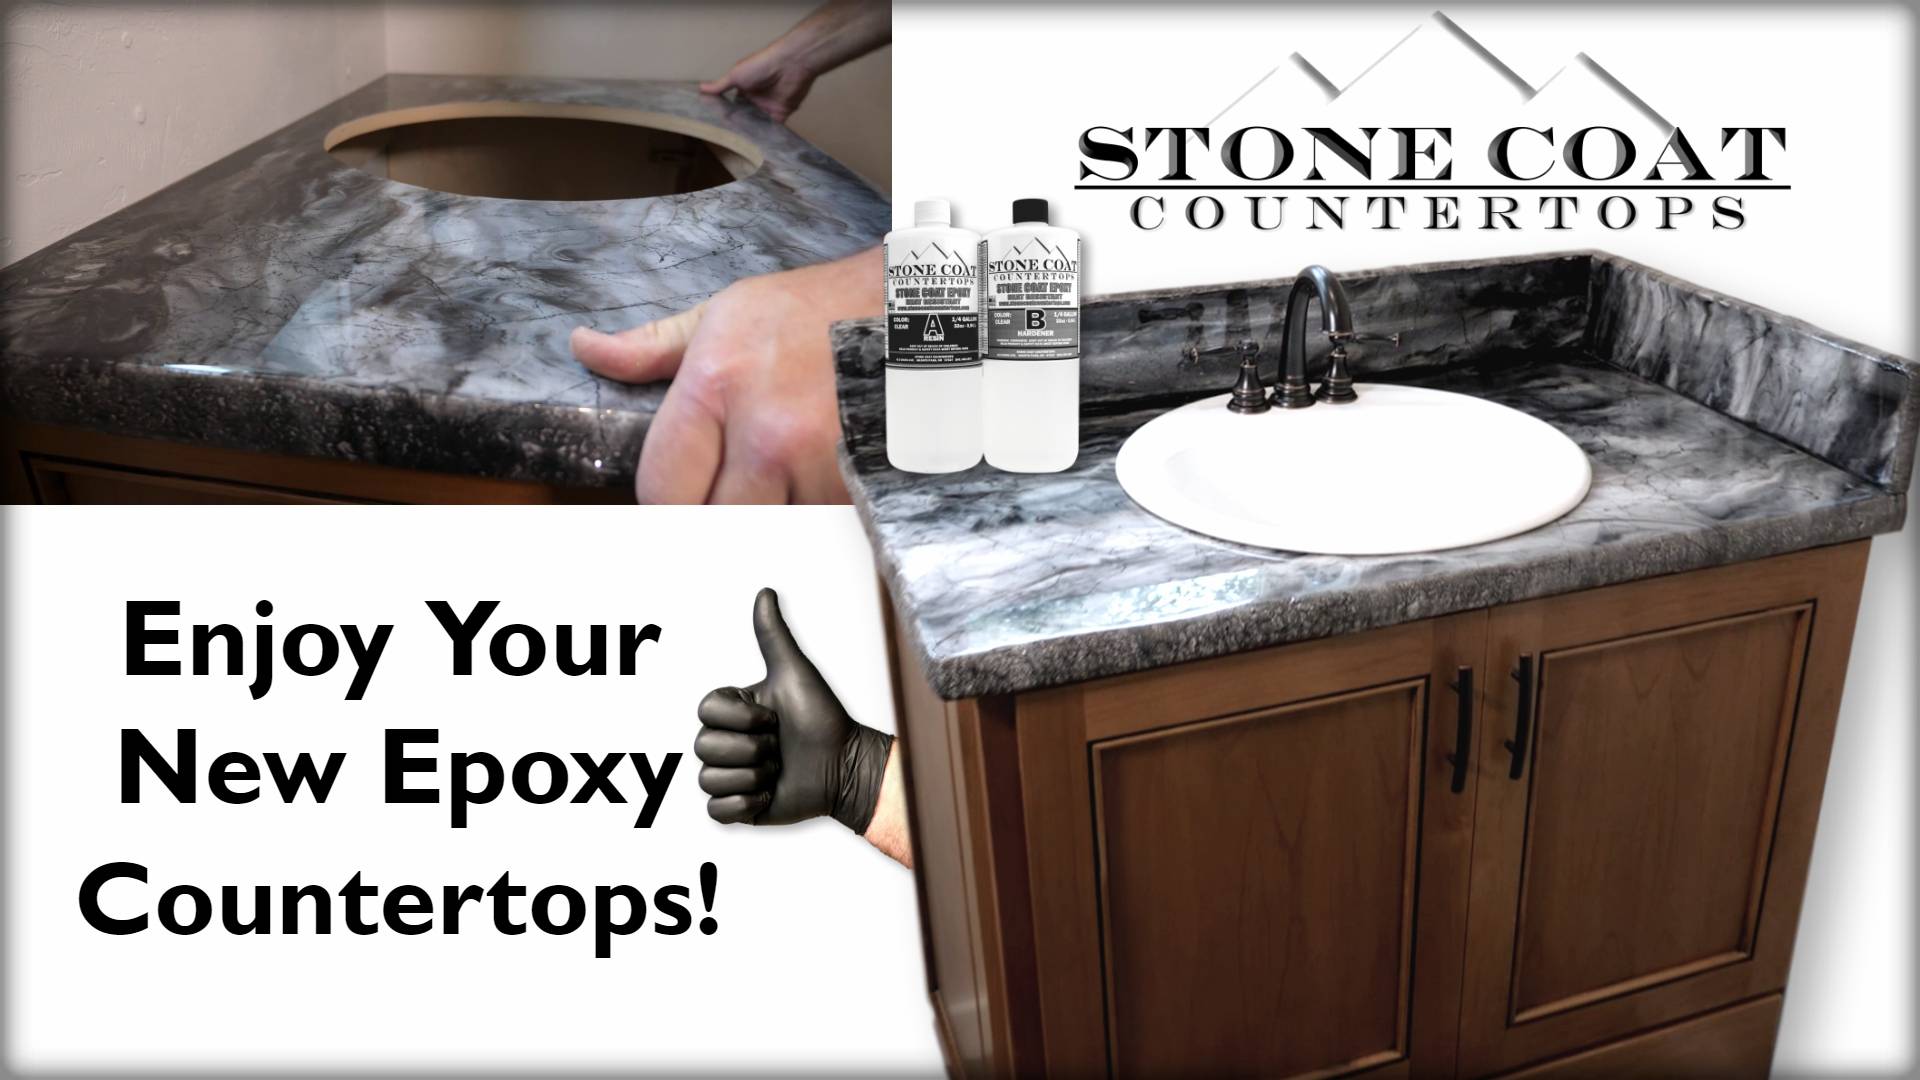 Stone Coat Epoxy Countertops - A beautiful addition to your space!